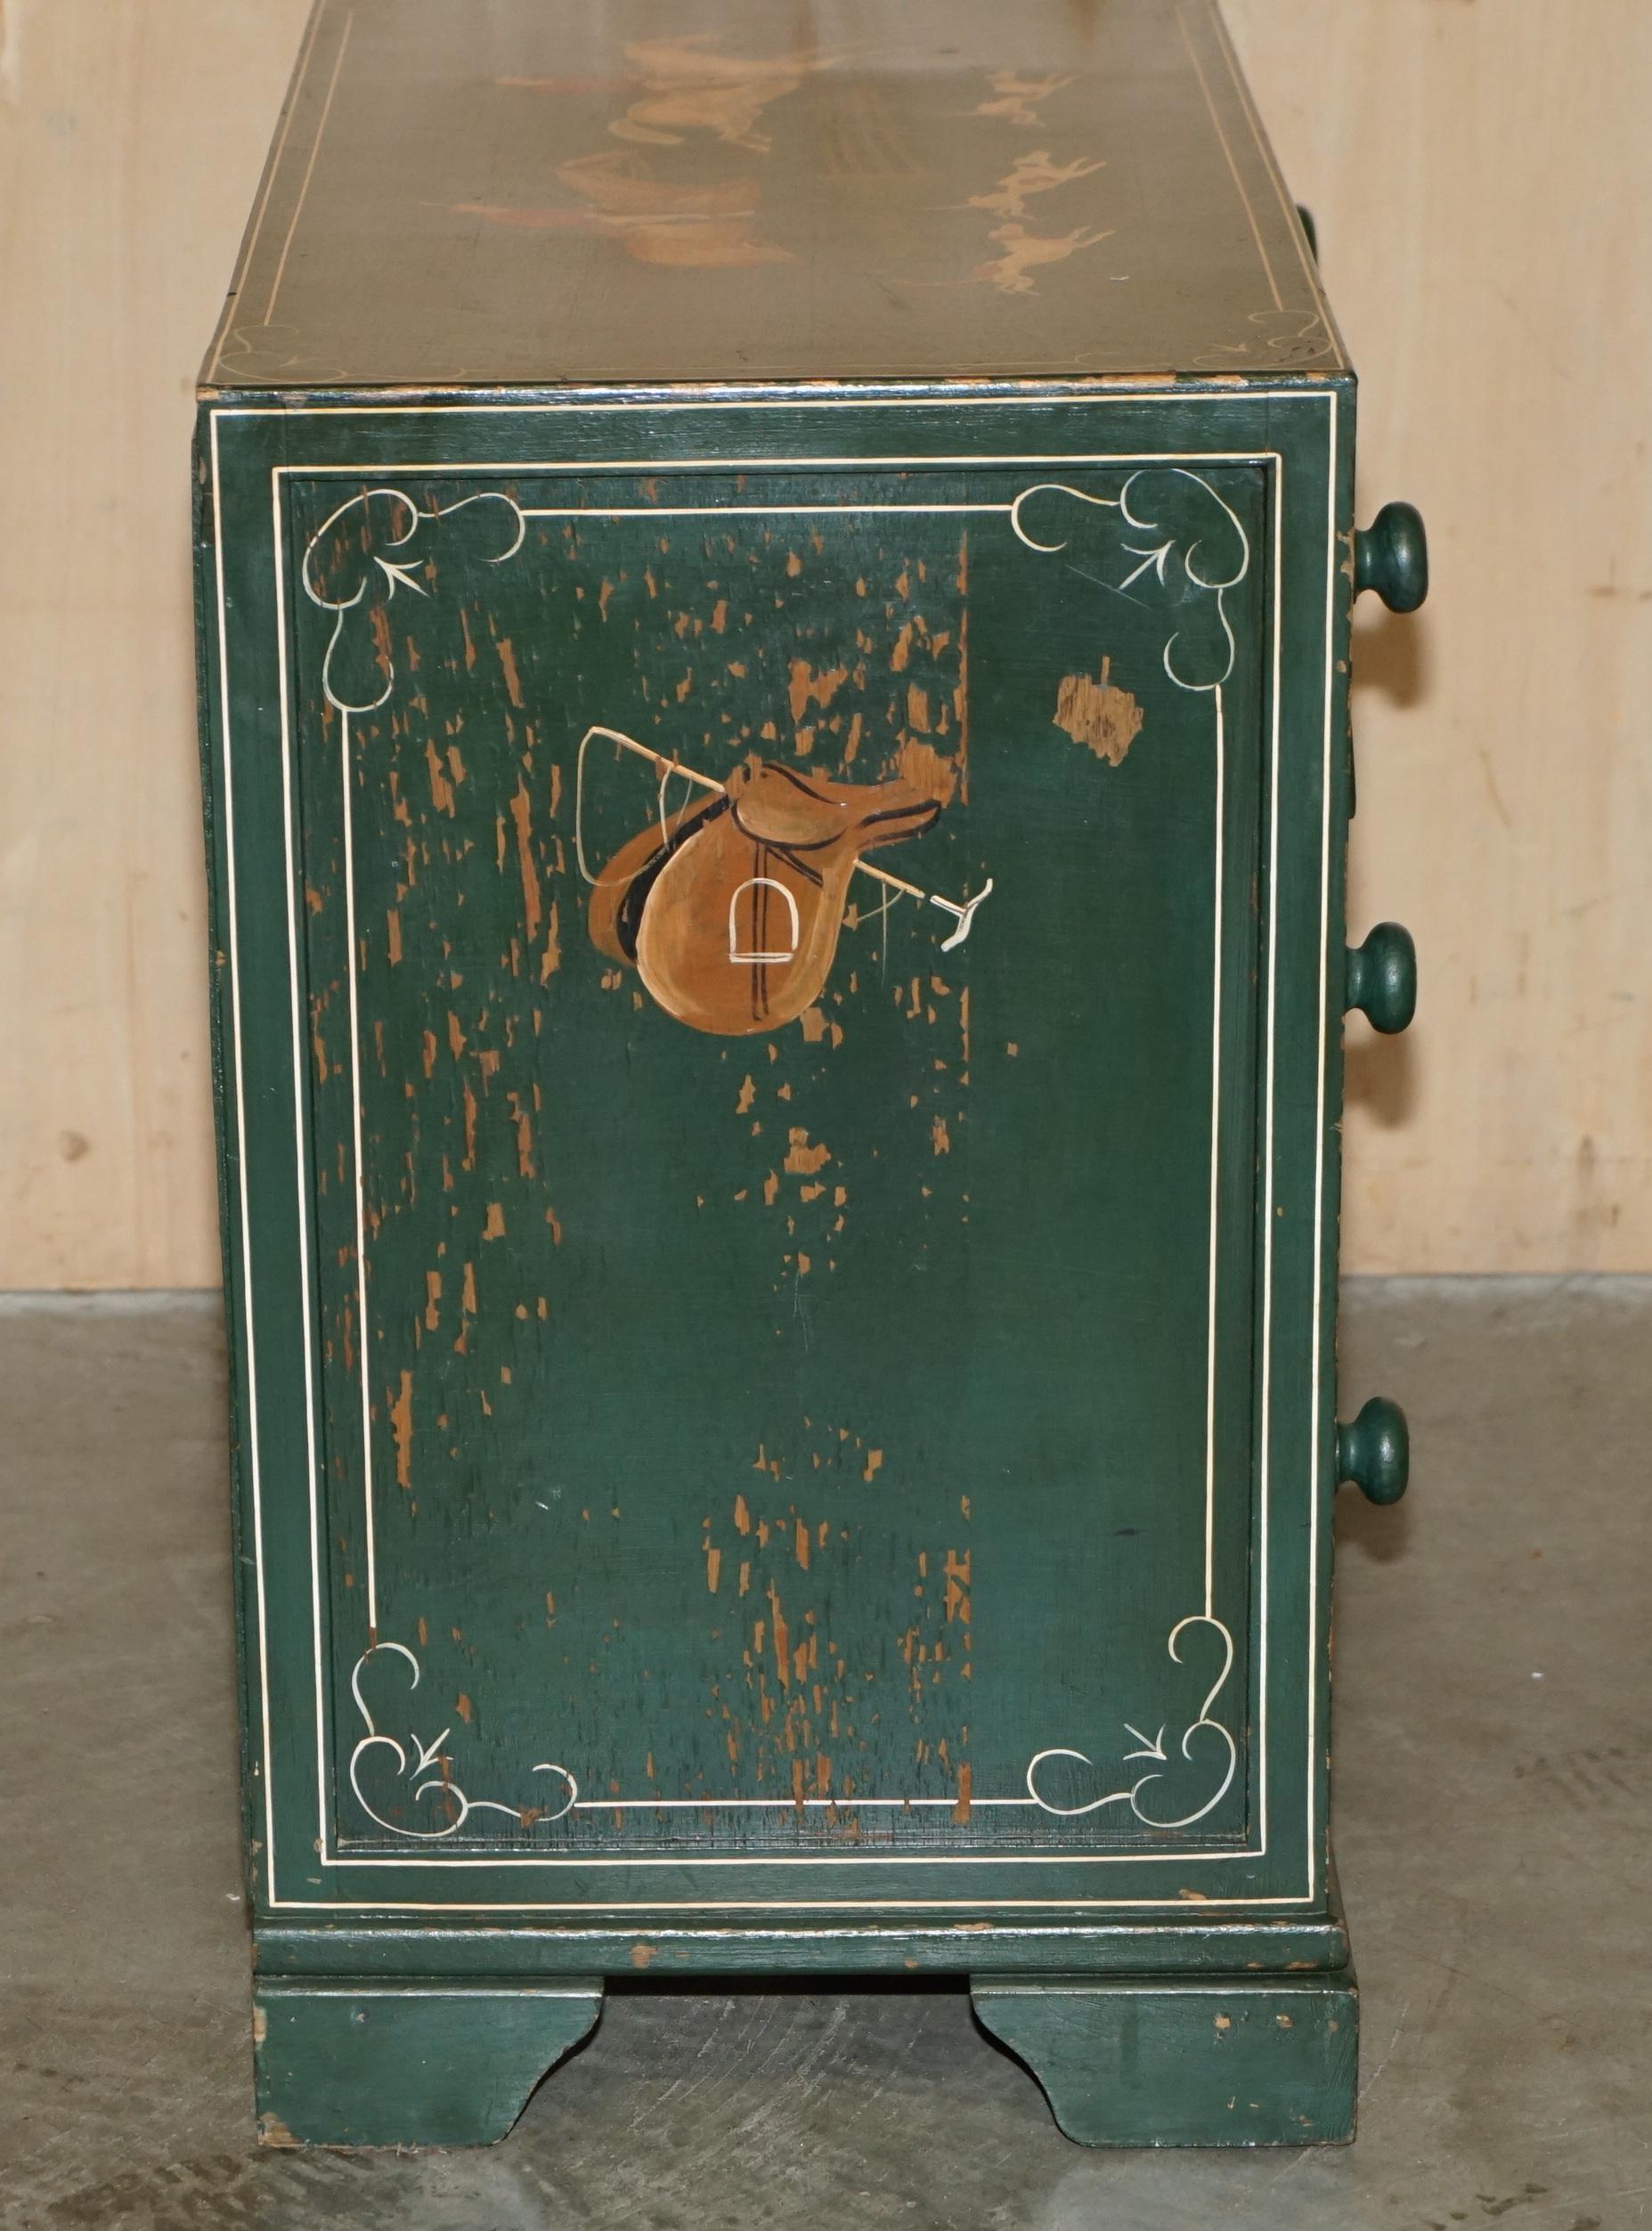 LOVELY ANTiQUE CHEST OF DRAWERS PAINTES EN GREEN DEPICTING HORSE & RIDER CIRCA 1900 en vente 6